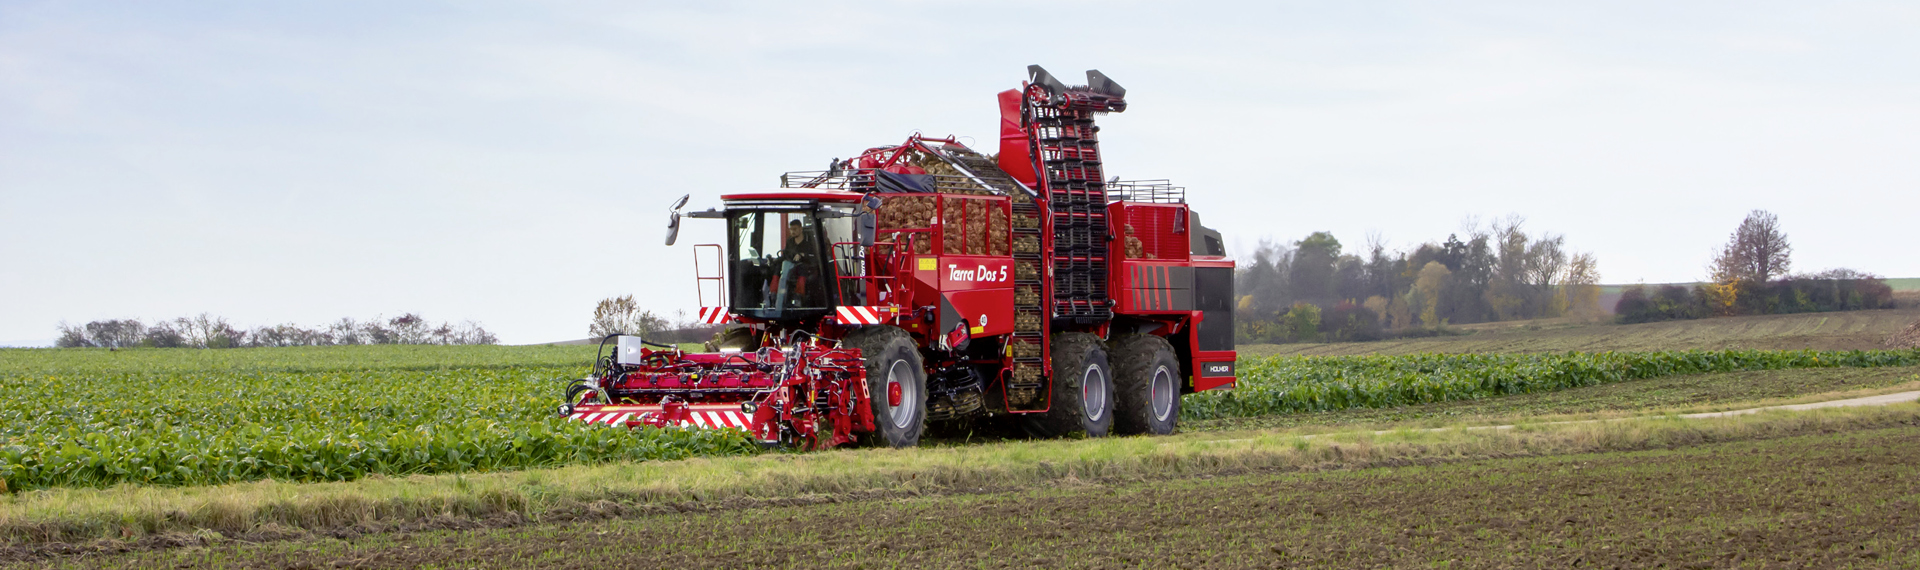 Sugar beet harvester made in Strenx high-strength structural steel working the fields.